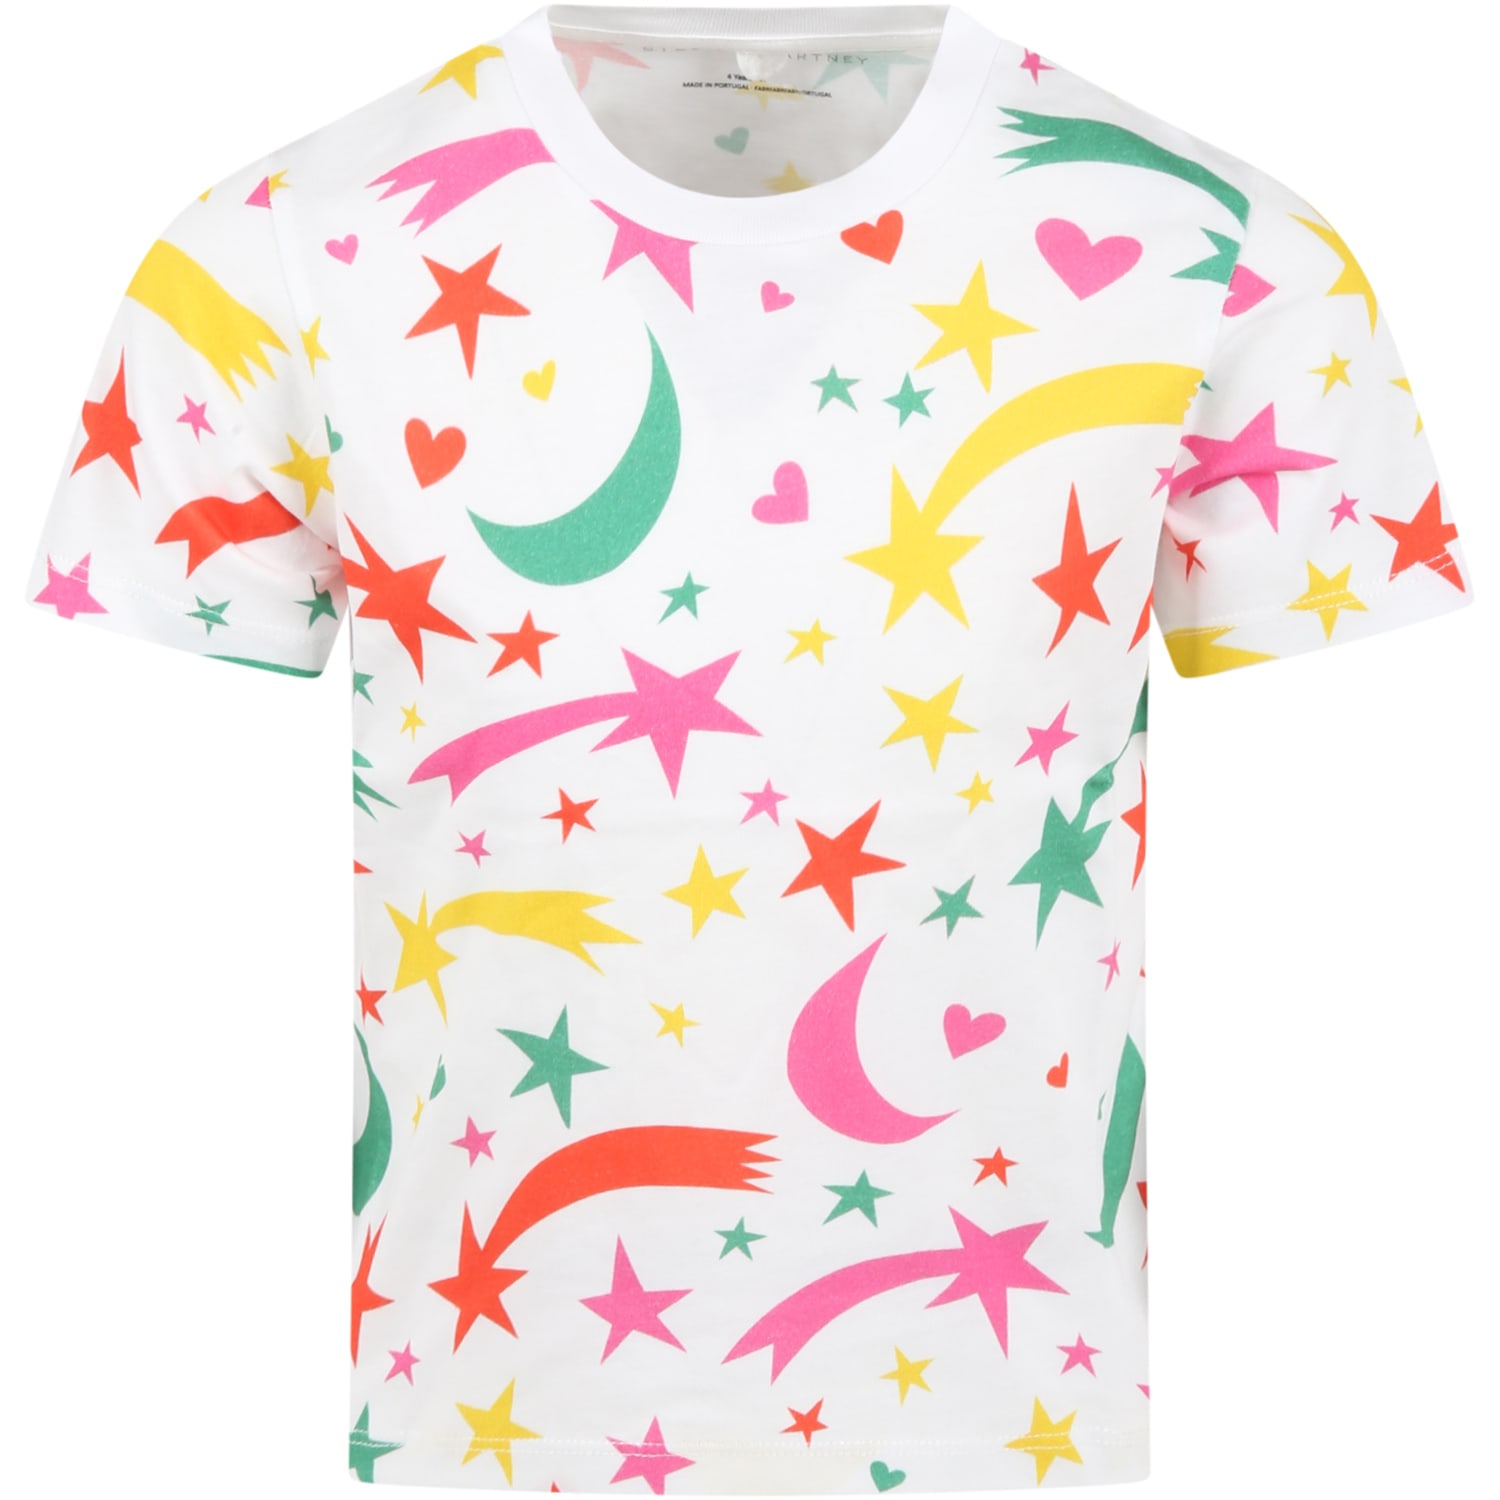 Stella McCartney Kids White T-shirt For Baby Girl With Colorful Stars, Moons And Hearts